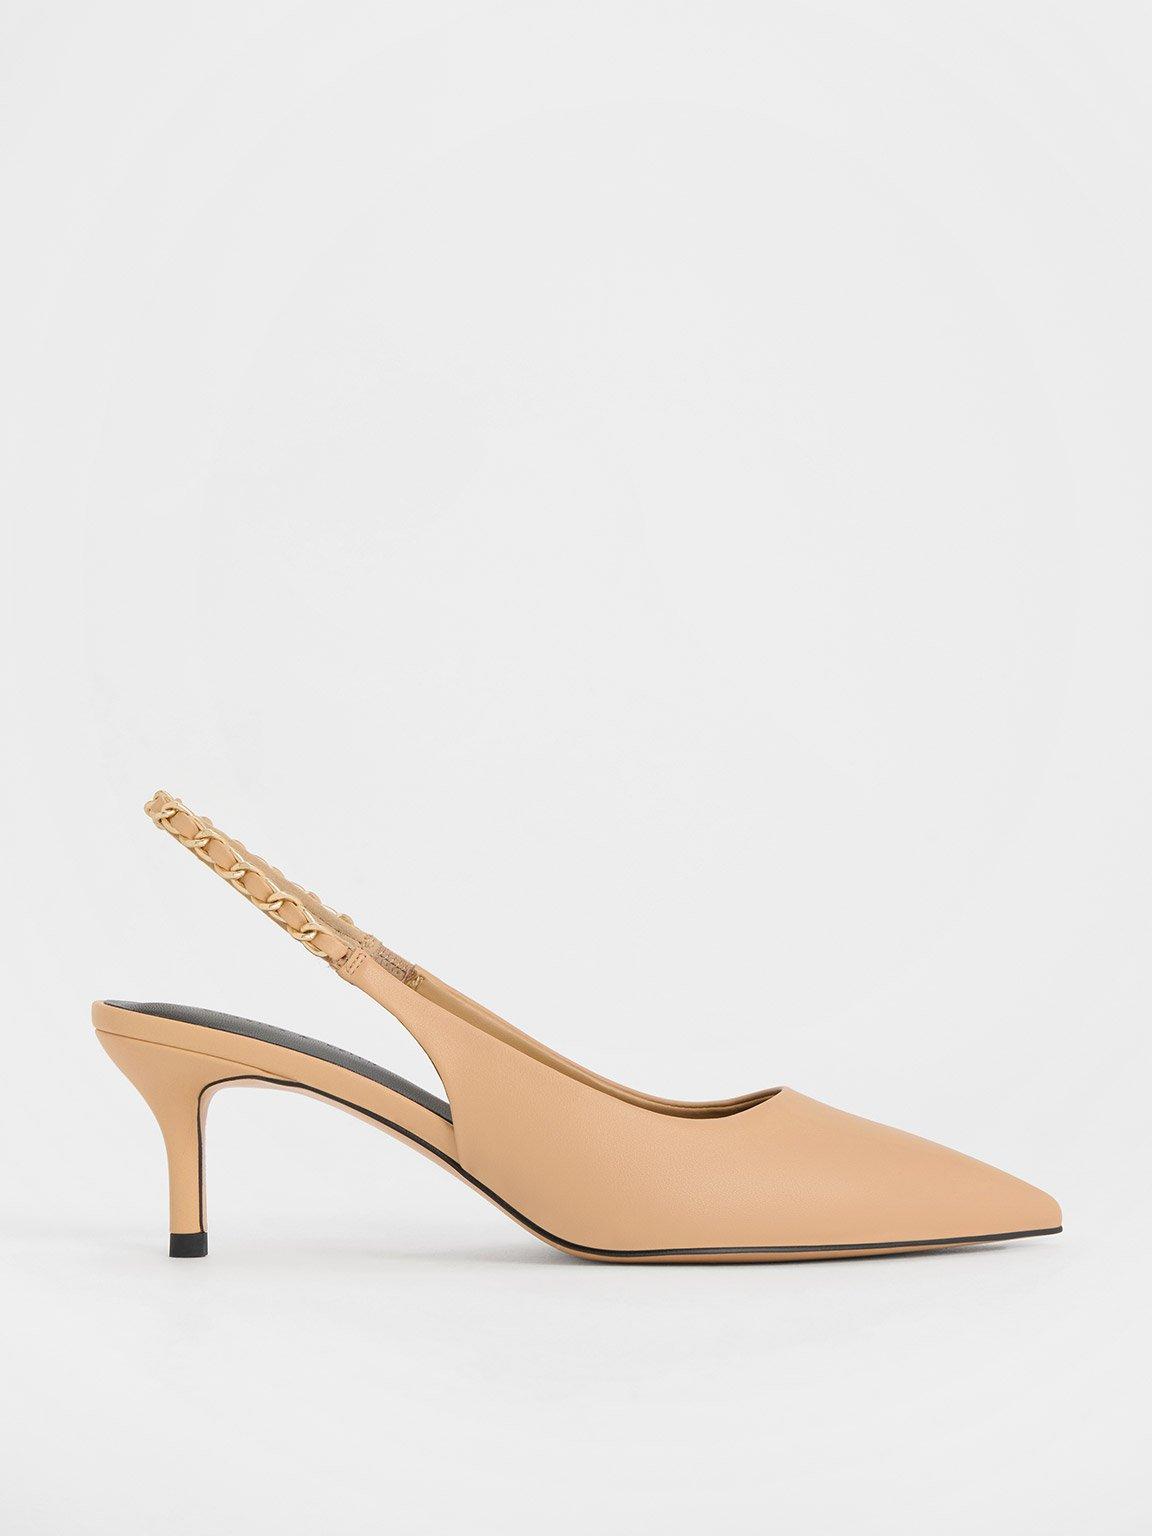 Charles & Keith Braided-chain Slingback Pumps in Natural